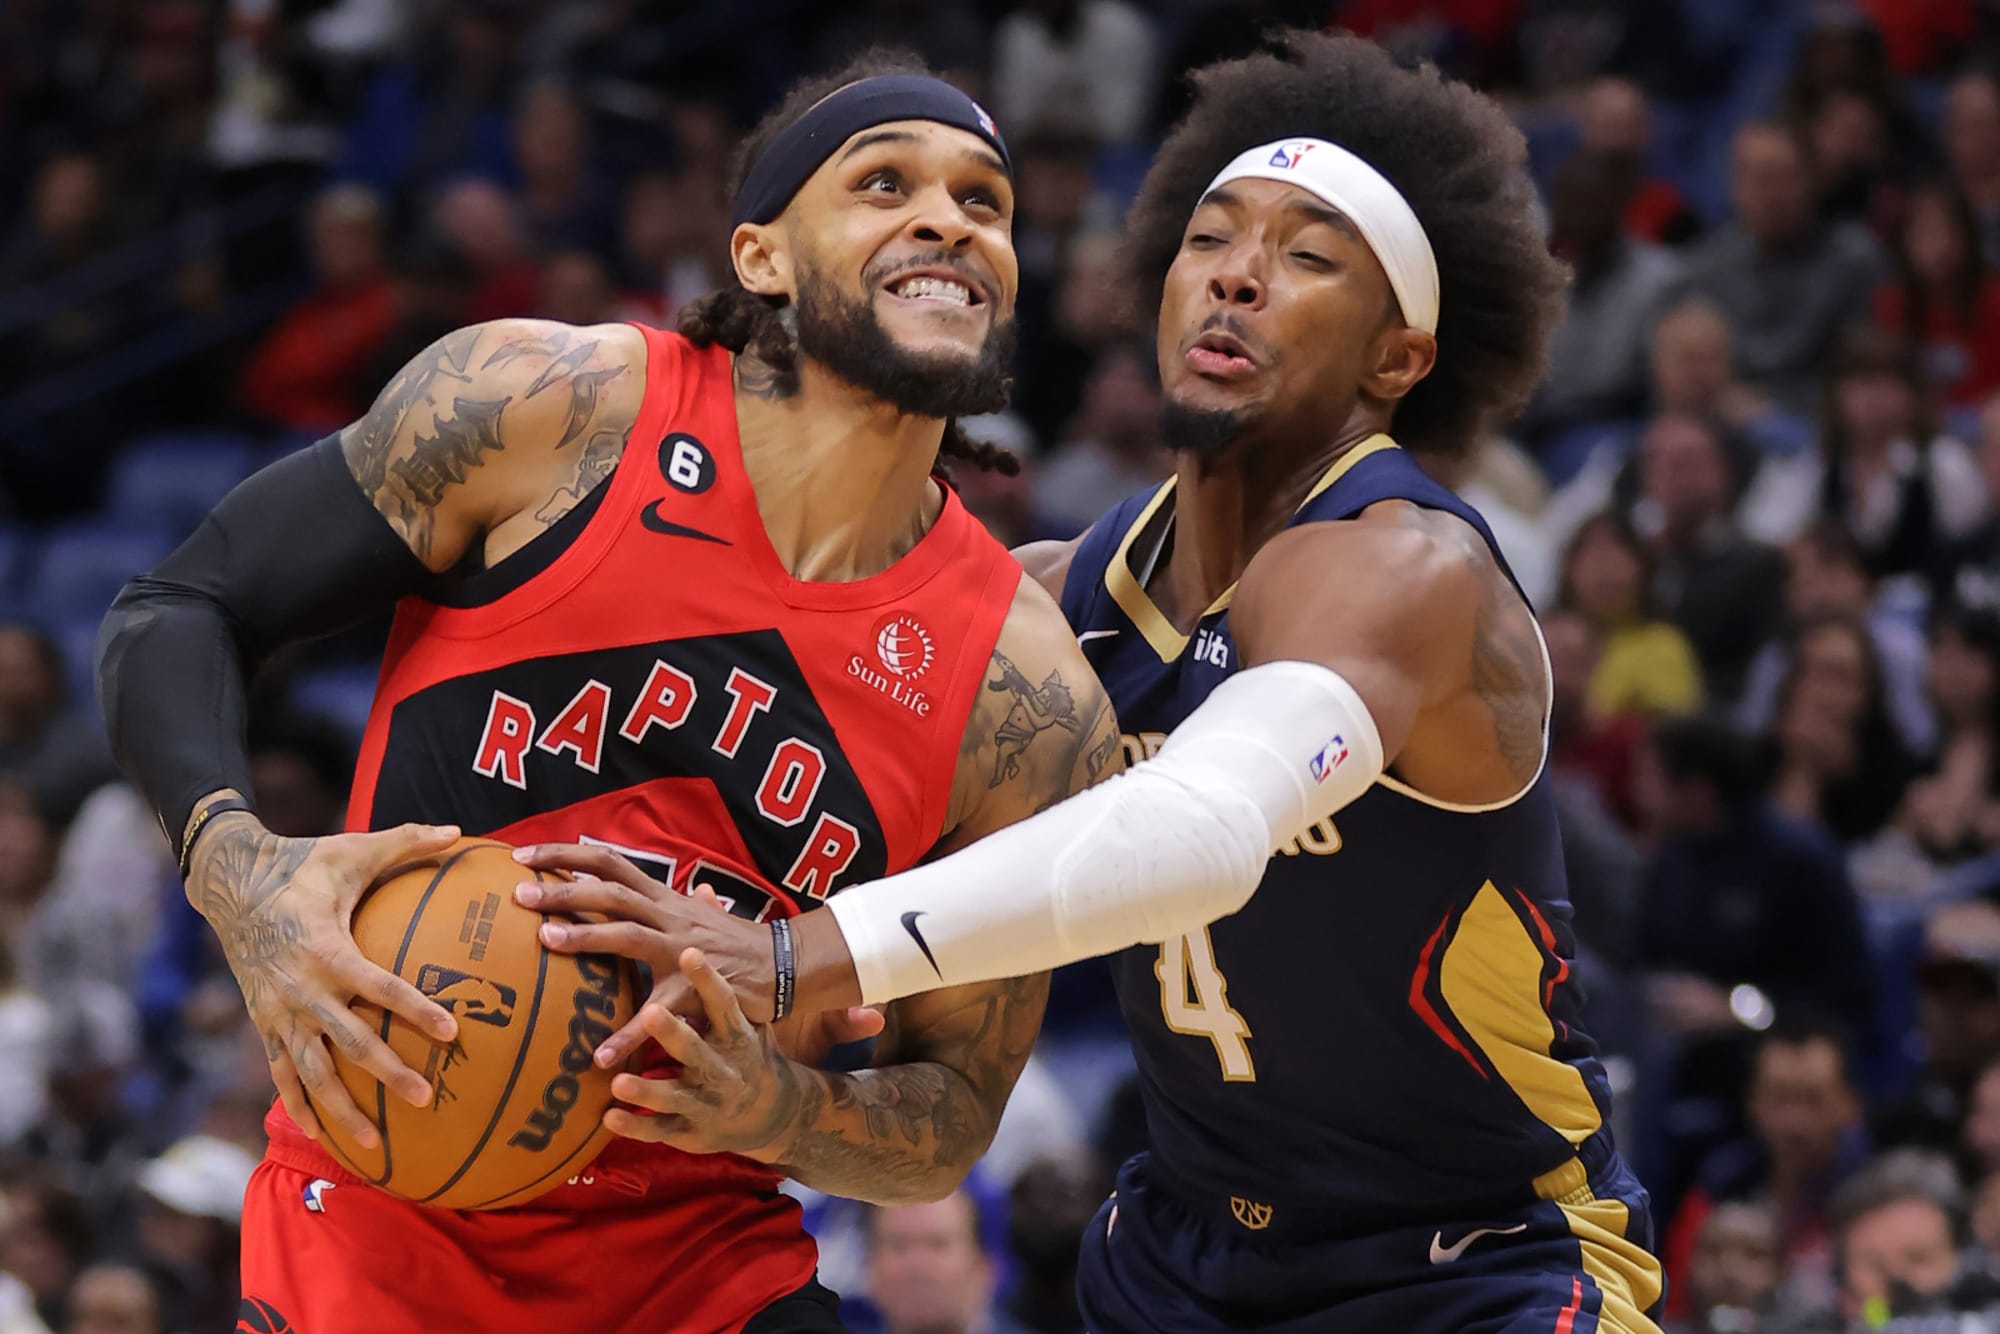 1 concerning takeaway from Raptors’ humiliating loss to Pelicans